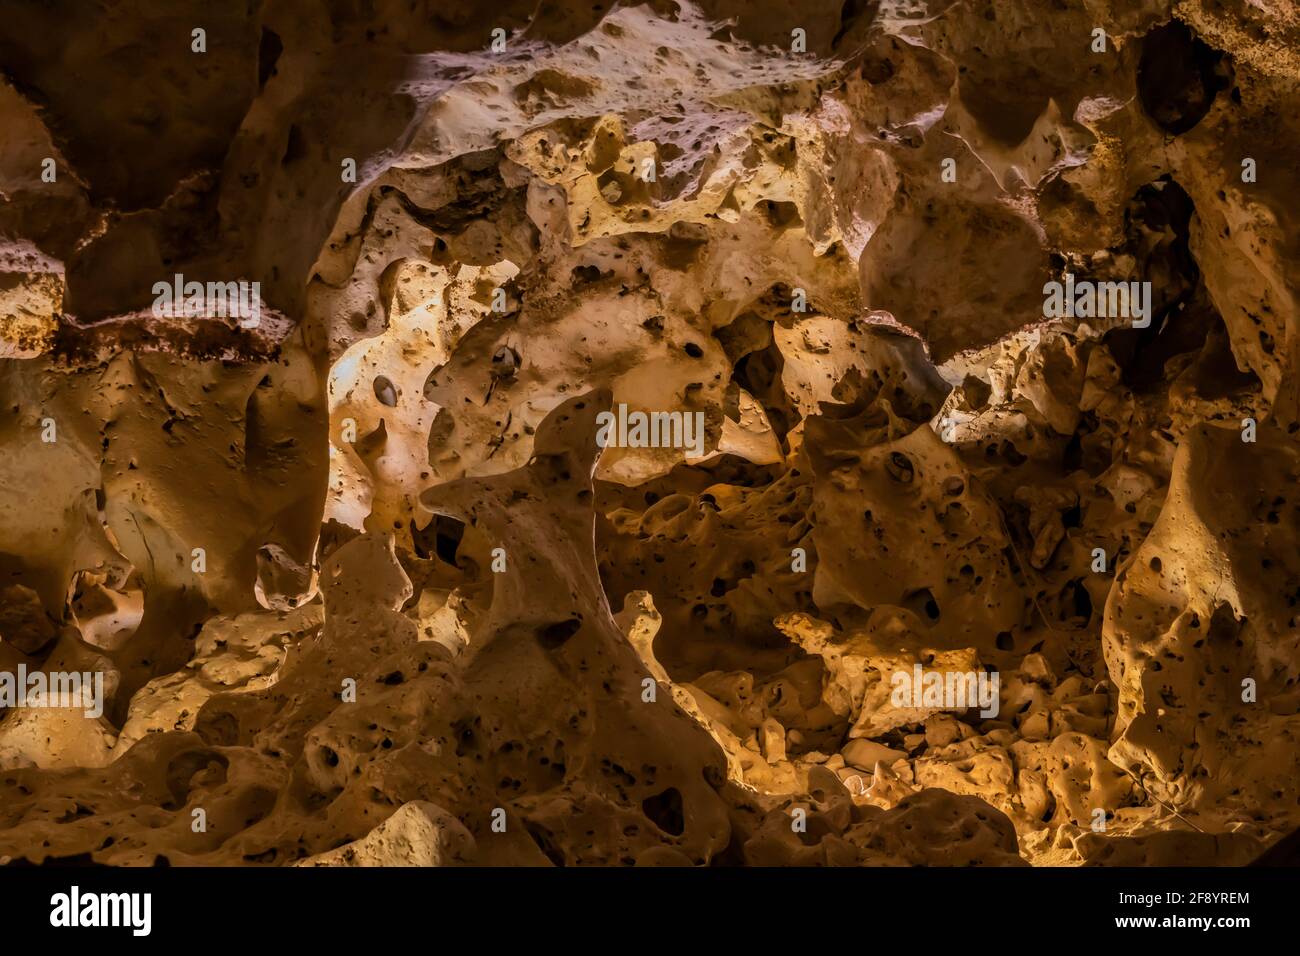 Boneyard, named for its look of a pile of old bones, deep underground in Carlsbad Caverns National Park, New Mexico, USA Stock Photo